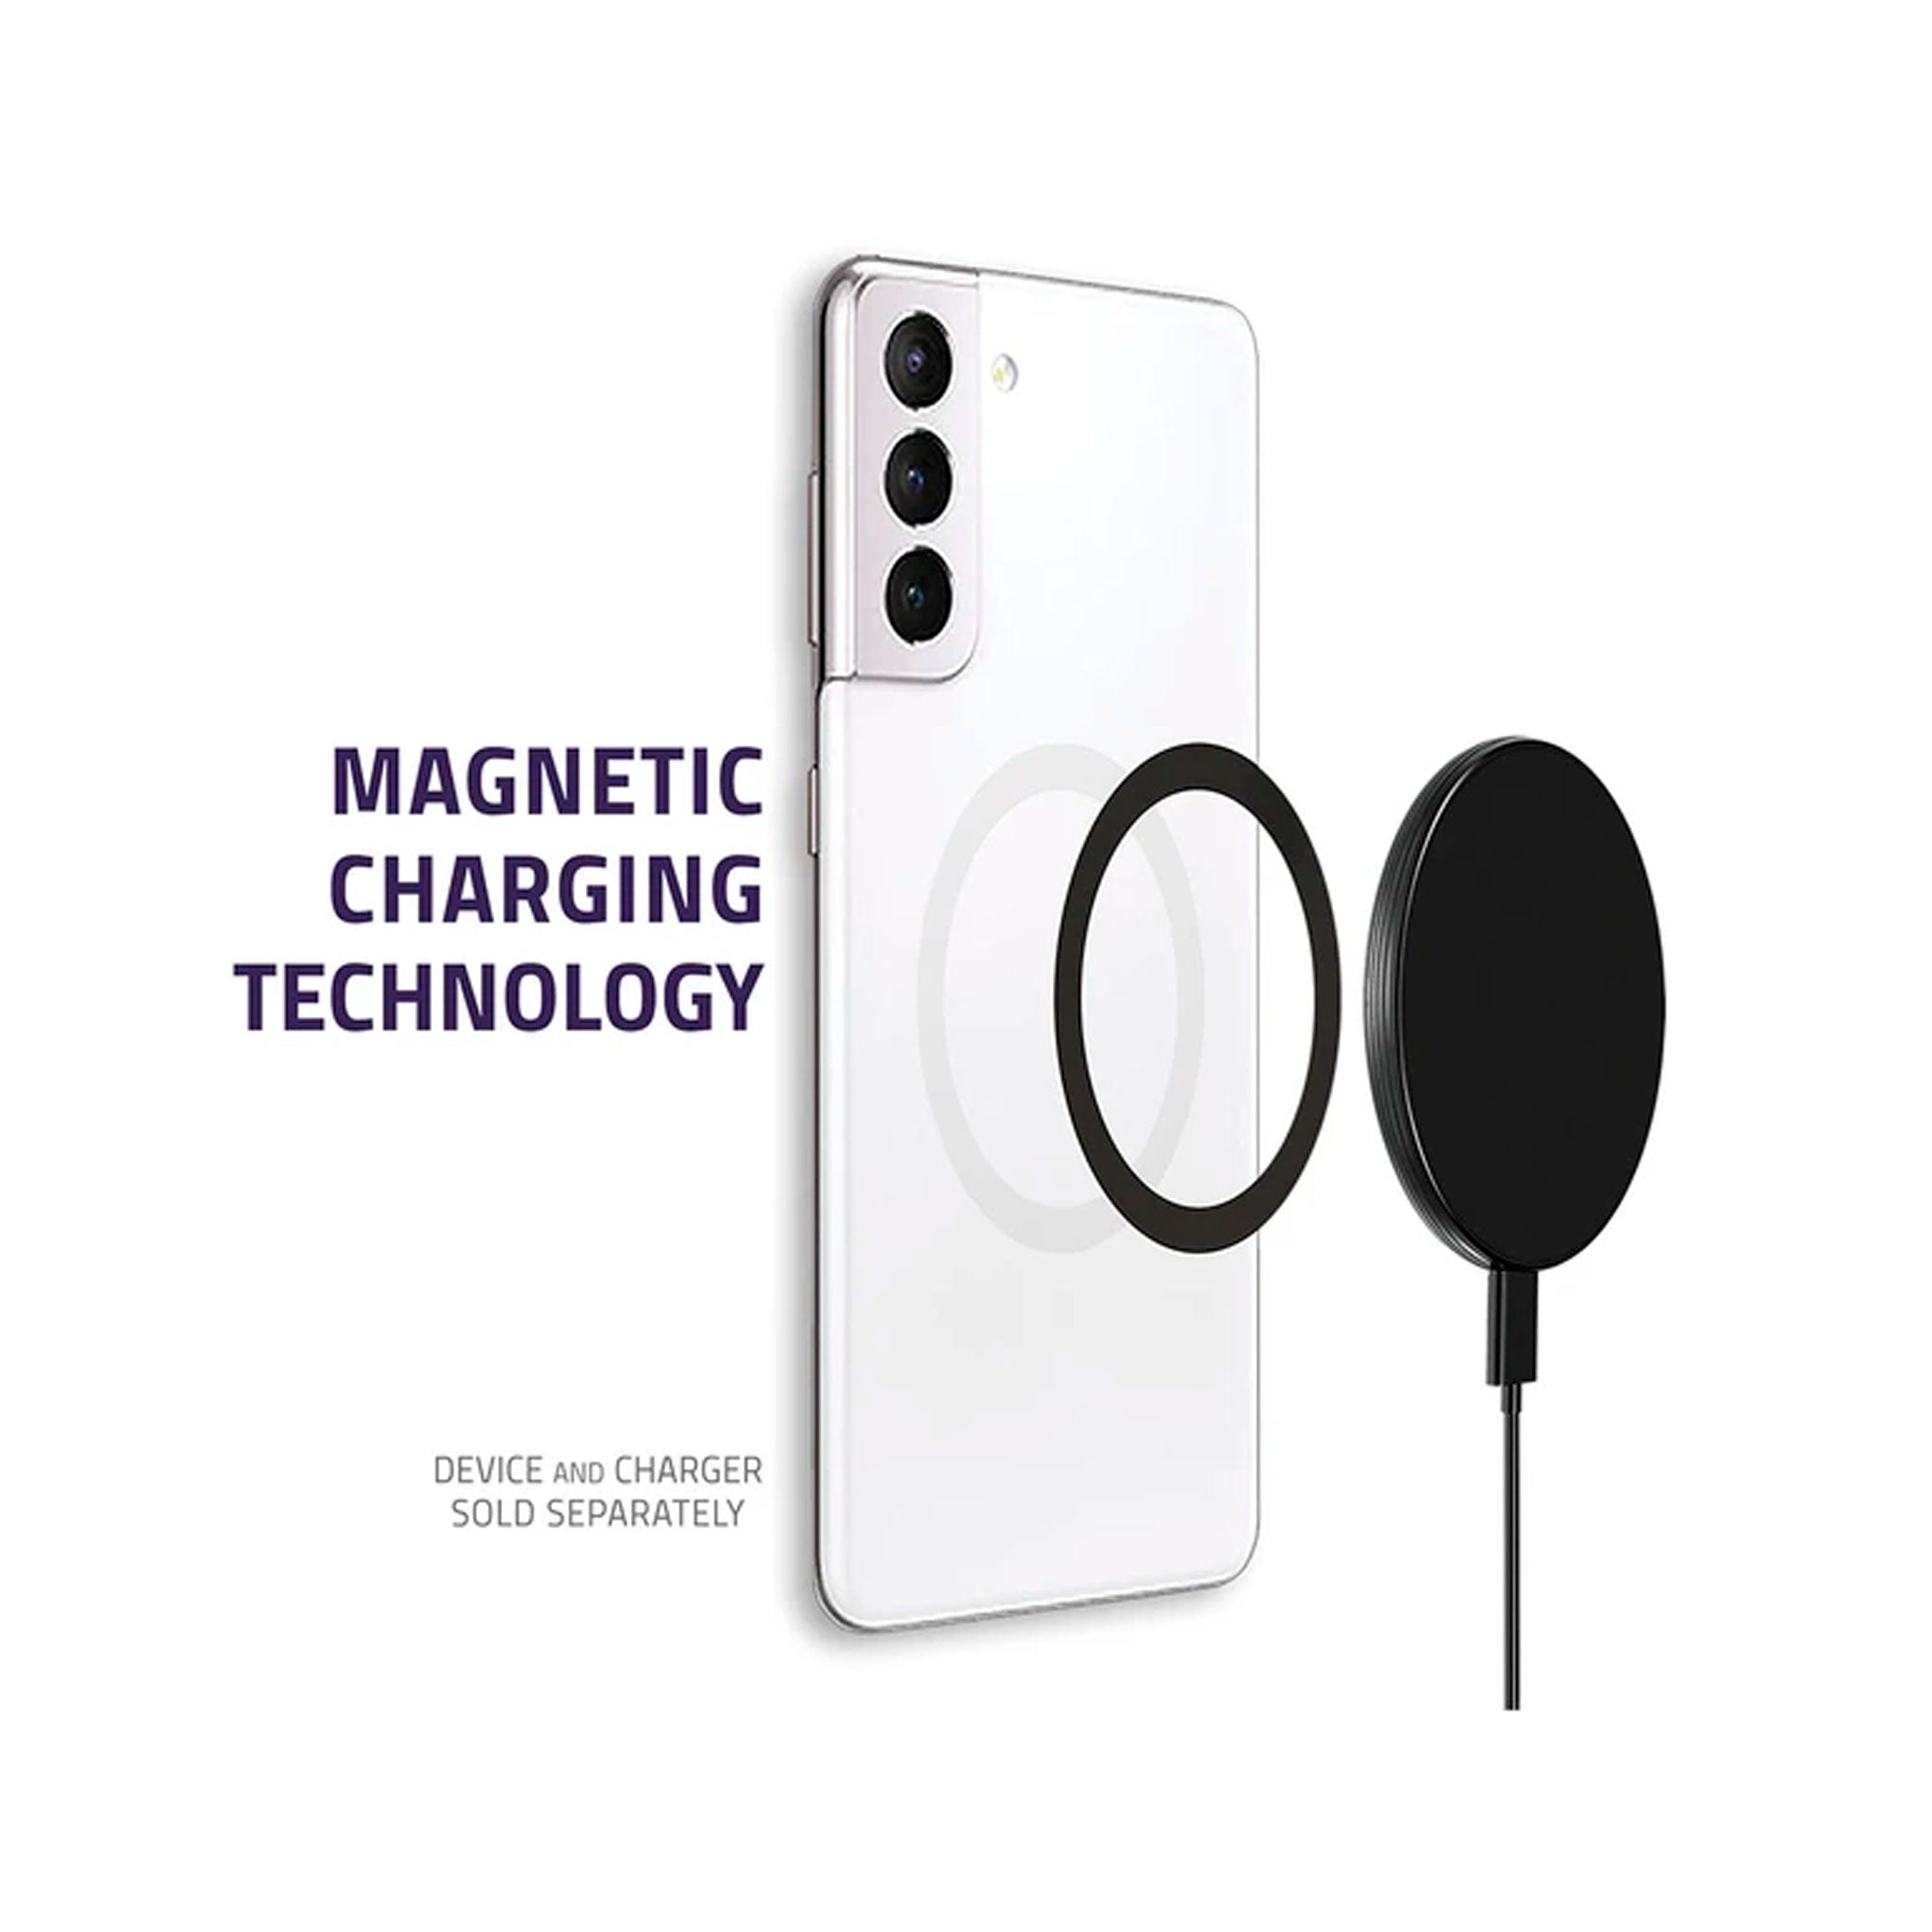 QMADIX, Qmadix - Magnetic Wireless Charger With Metal Ring 3 Pack - Black